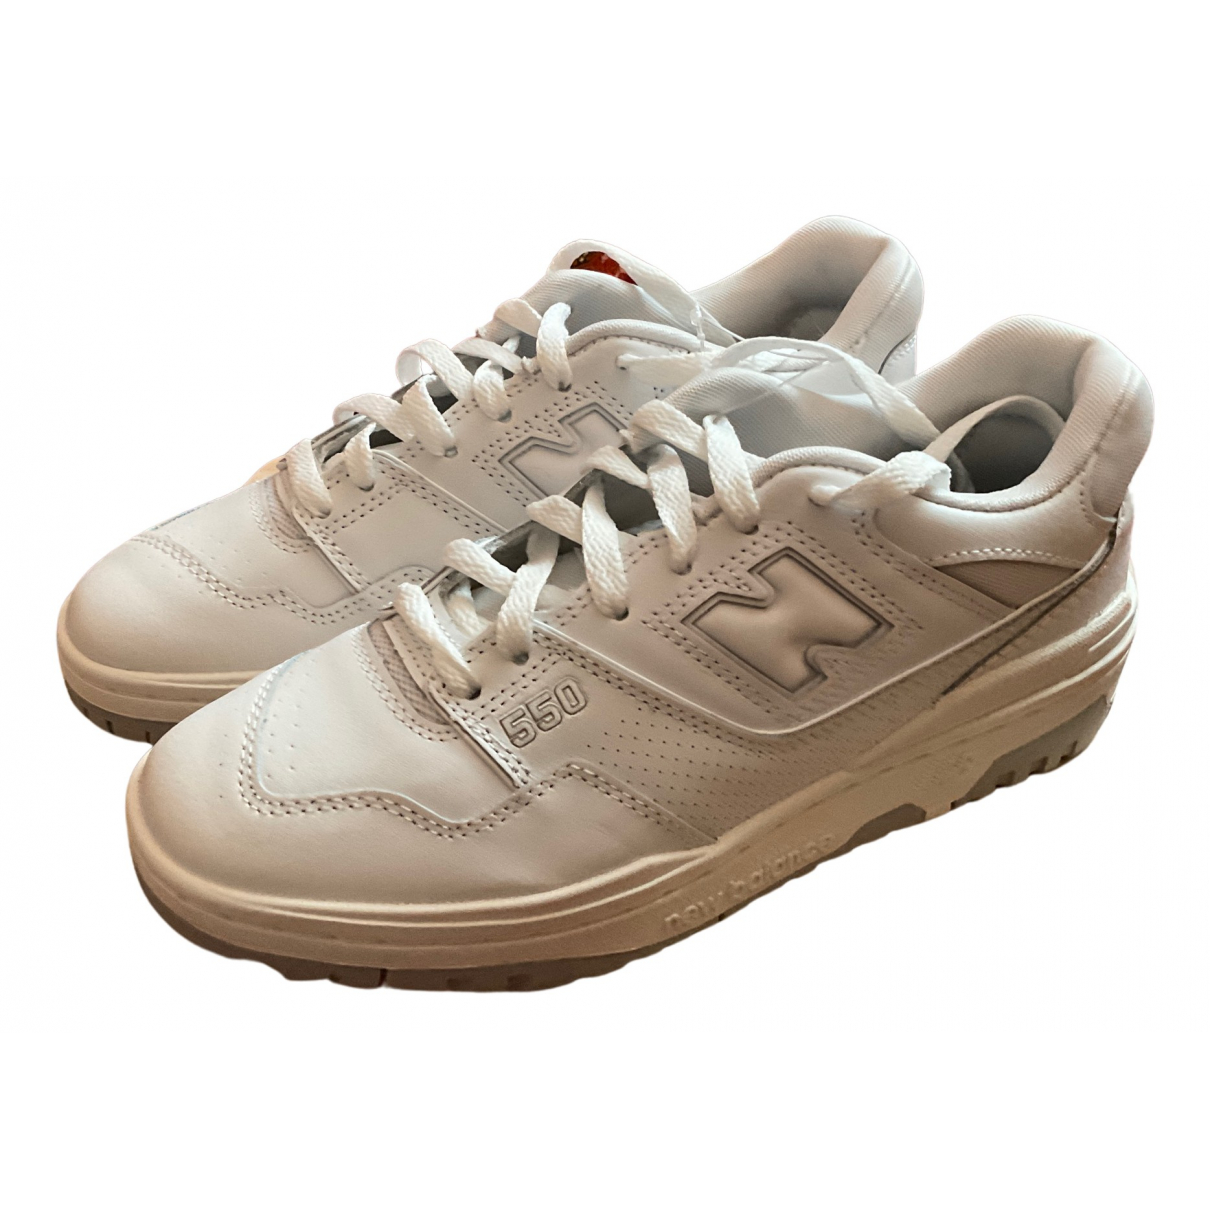 Super beauty product restock quality top 5 ☆ popular 550 leather trainers